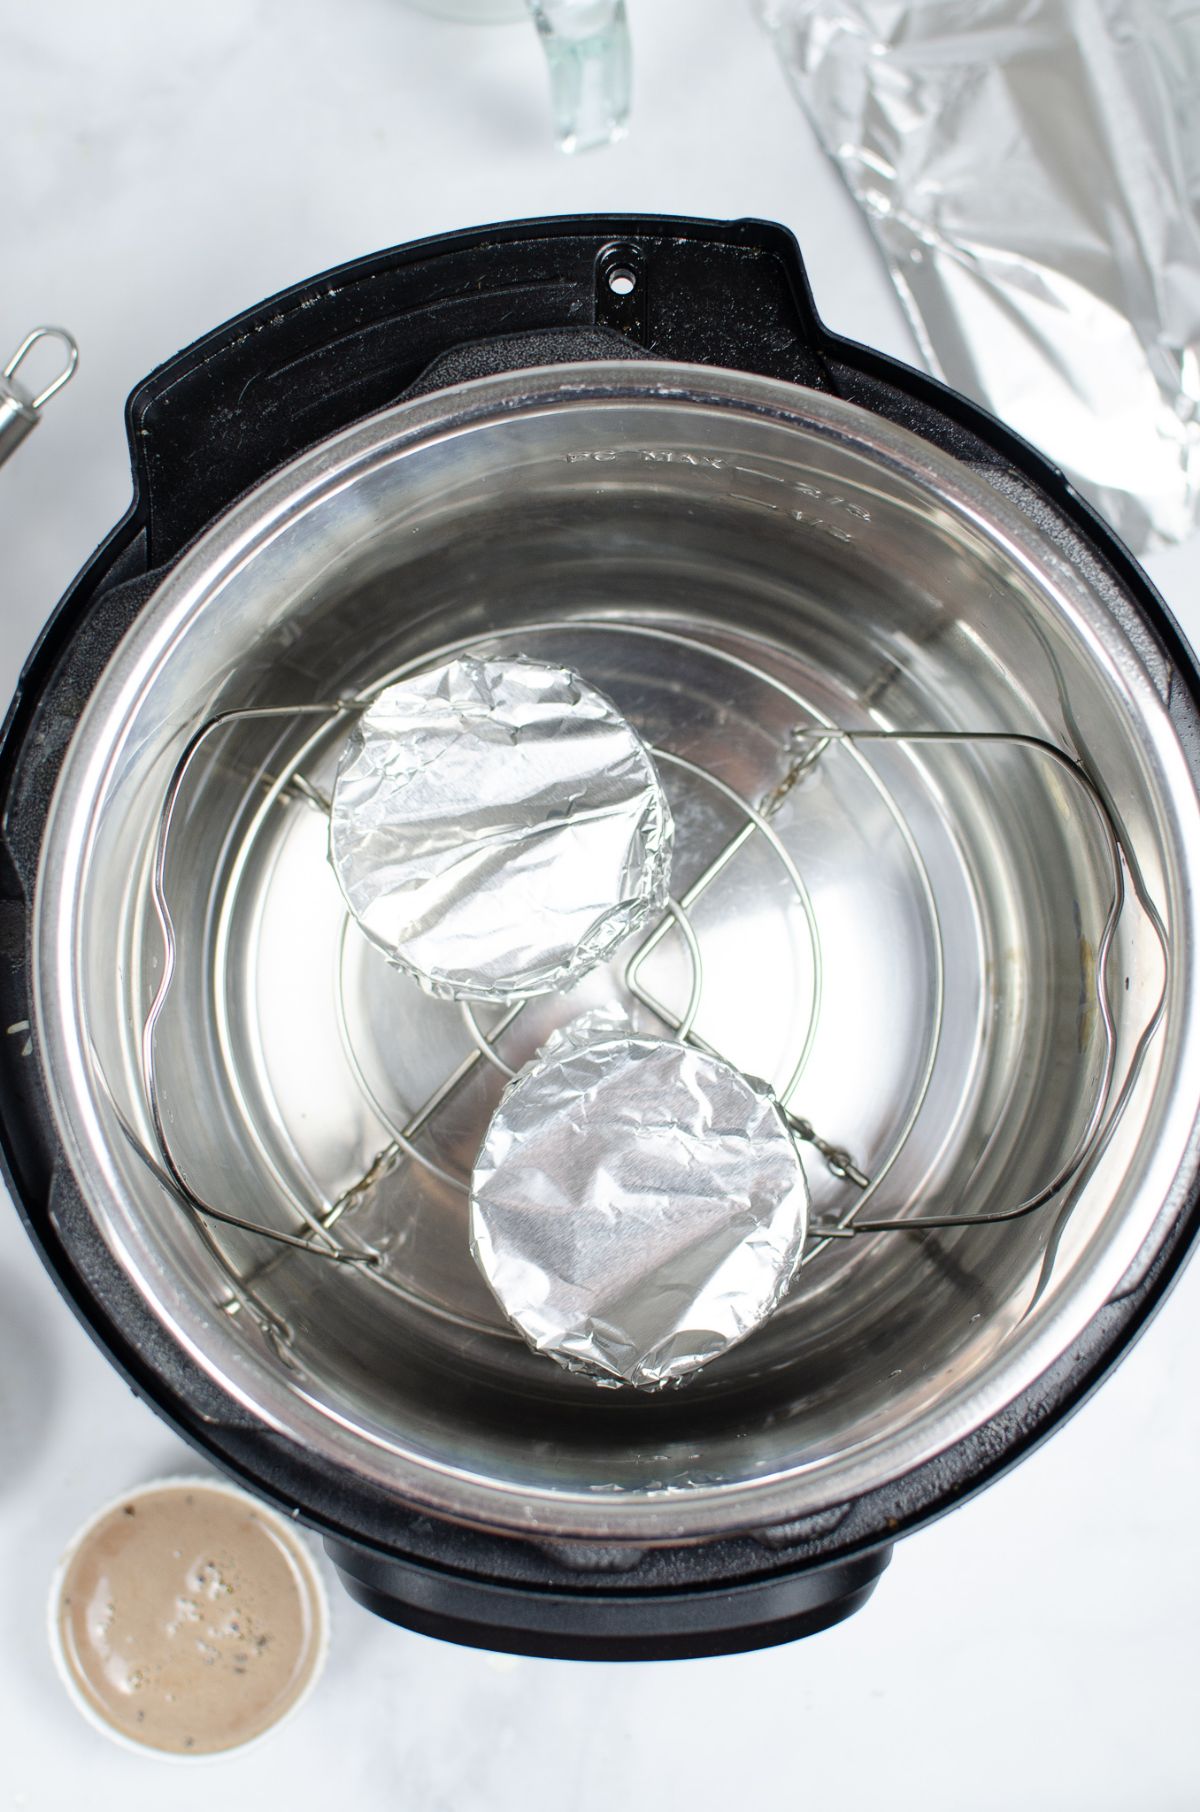 2 ramekins covered with foil and placed in the instant pot for steaming.